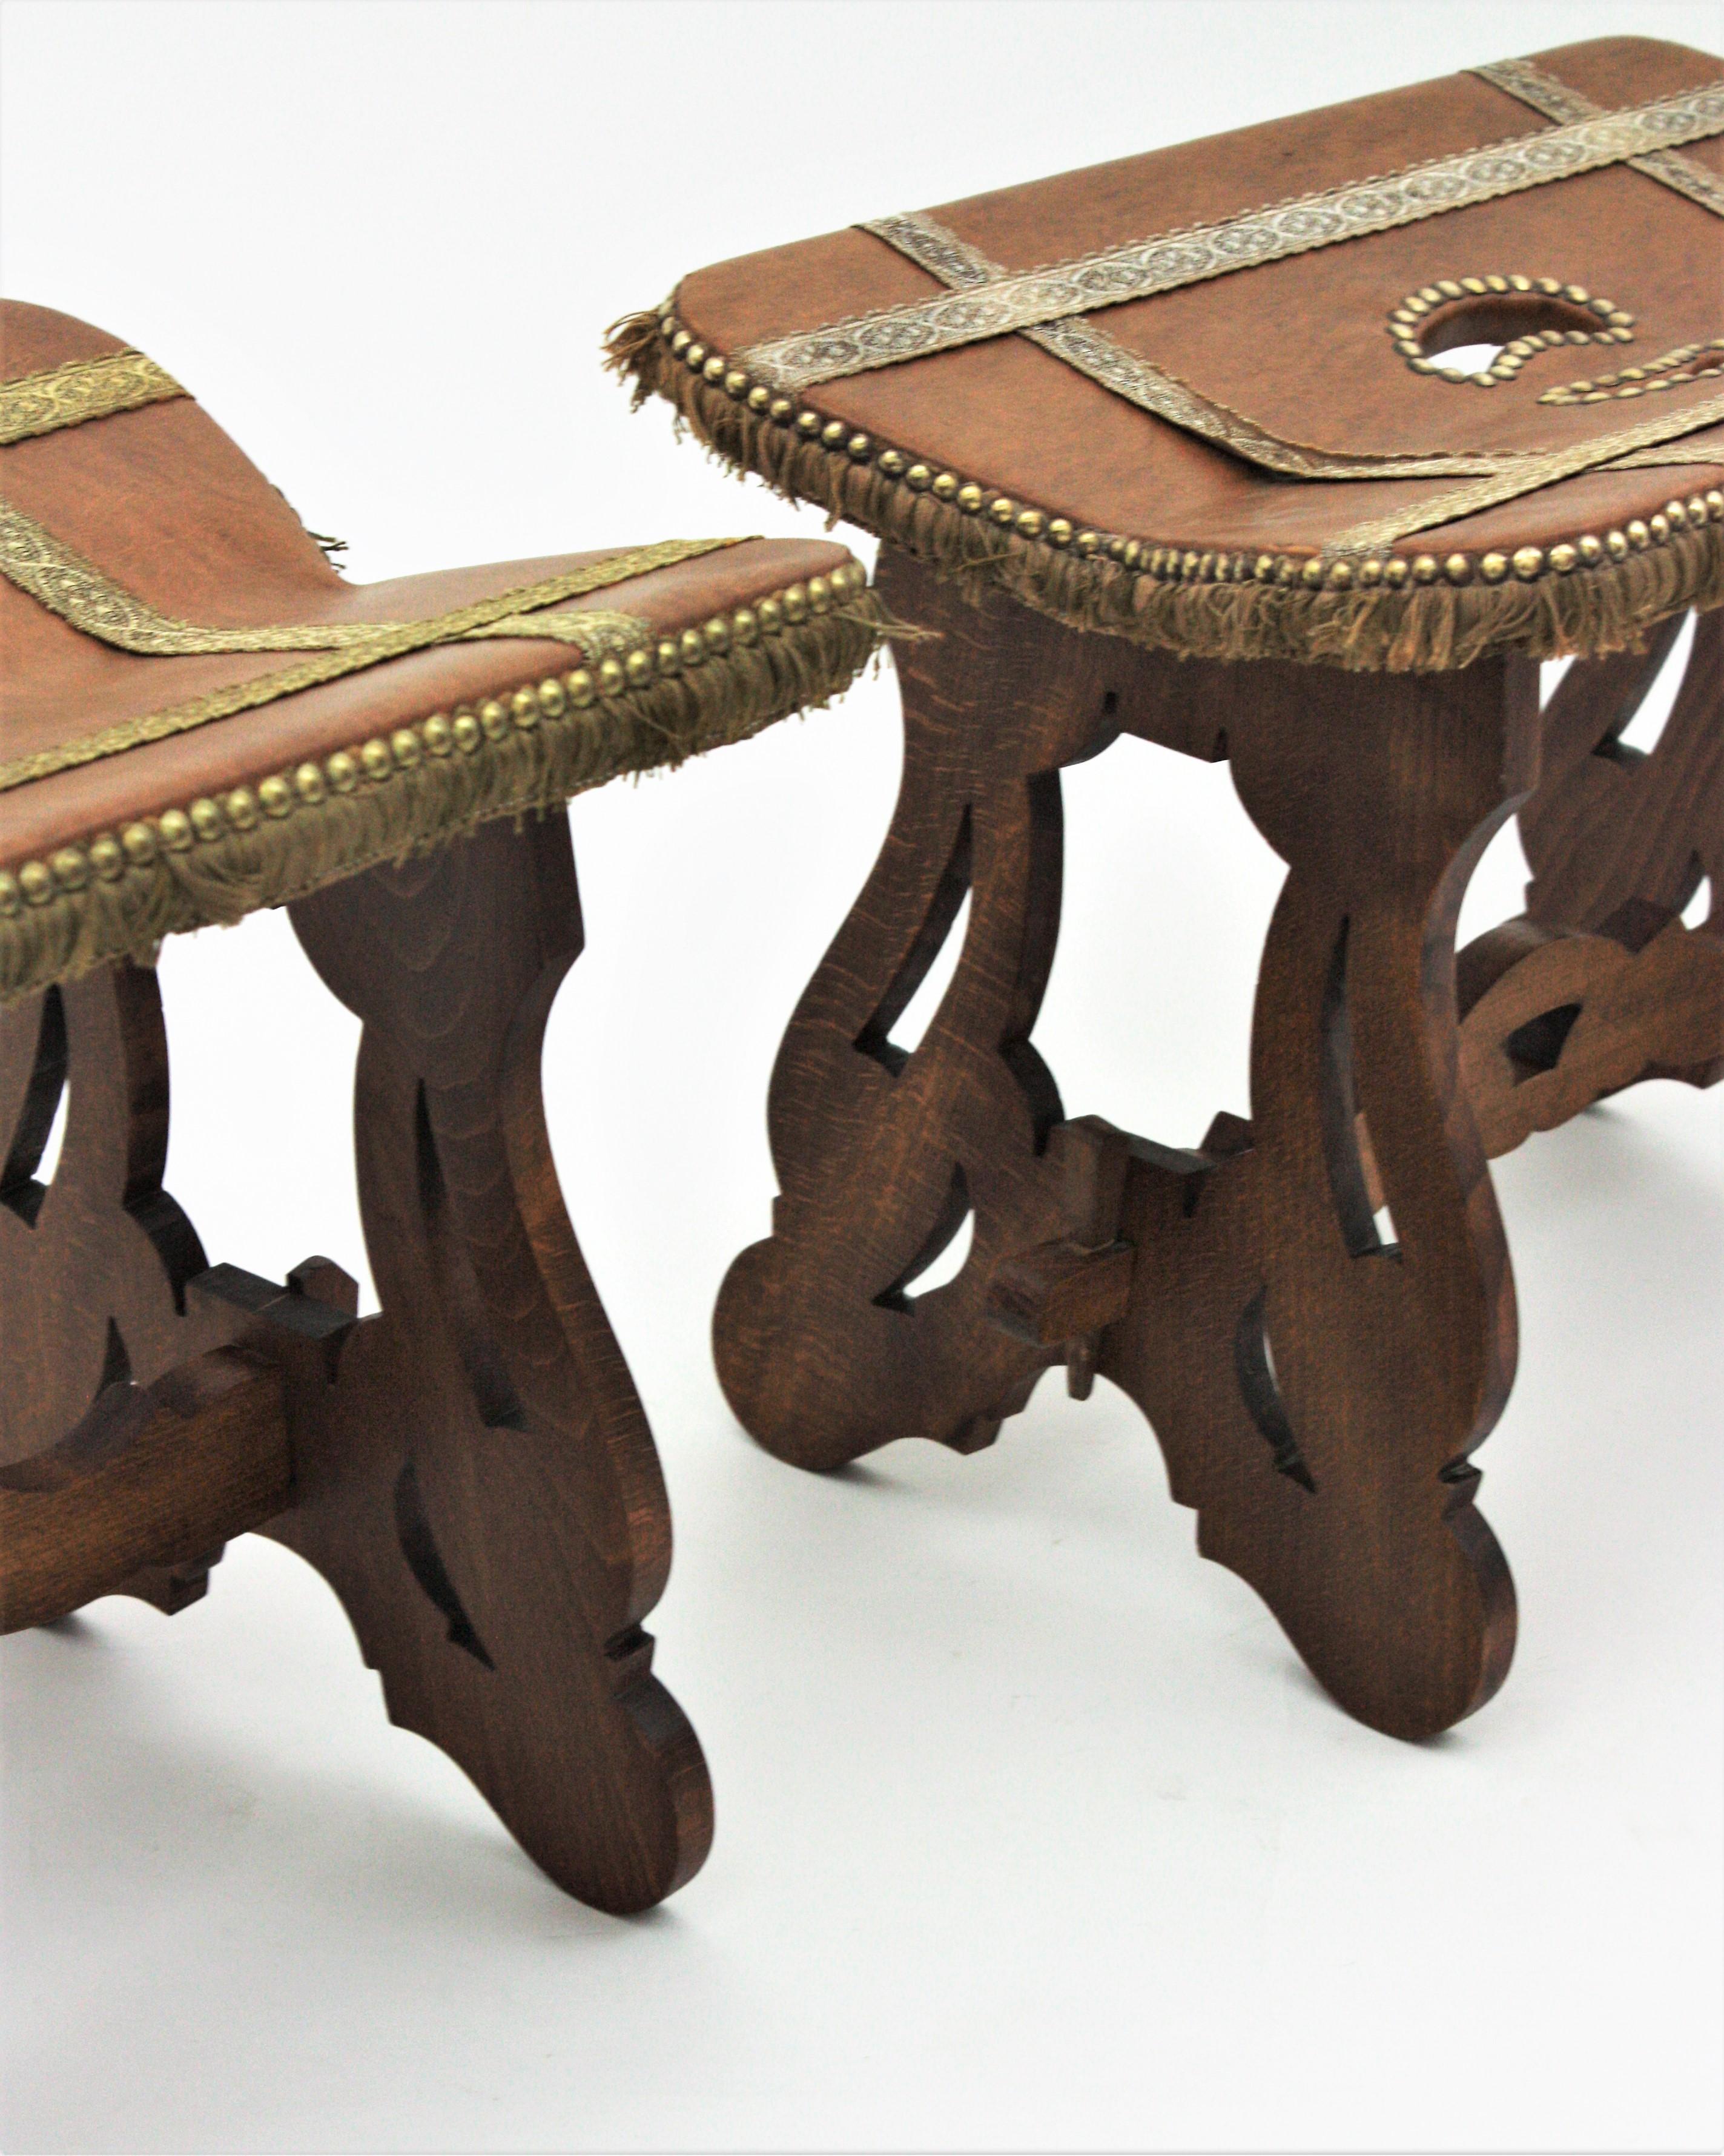 Pair of Spanish Stools in Wood and Leatherette, 1950s For Sale 2